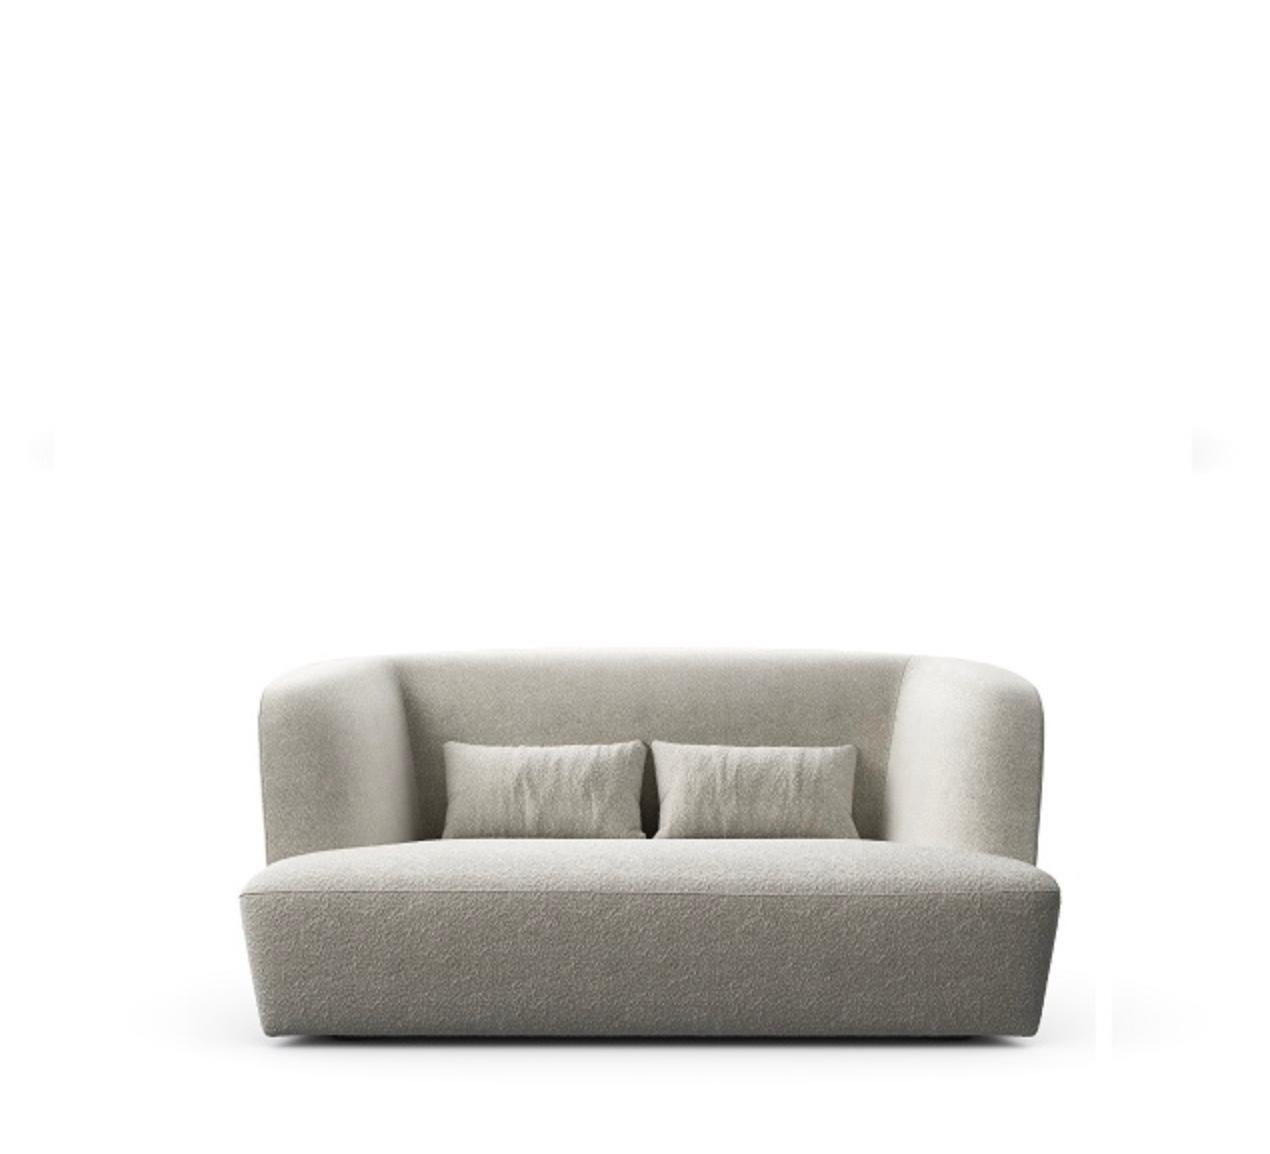 Lievore + Altherr Désile Park 'Davos' sofa 175 for Verzelloni, Italy. New, current production.

Davos curved sofa has a rounded line and an elegant and rigorous design, it offers high comfort thanks to the height of its backrest. Davos range